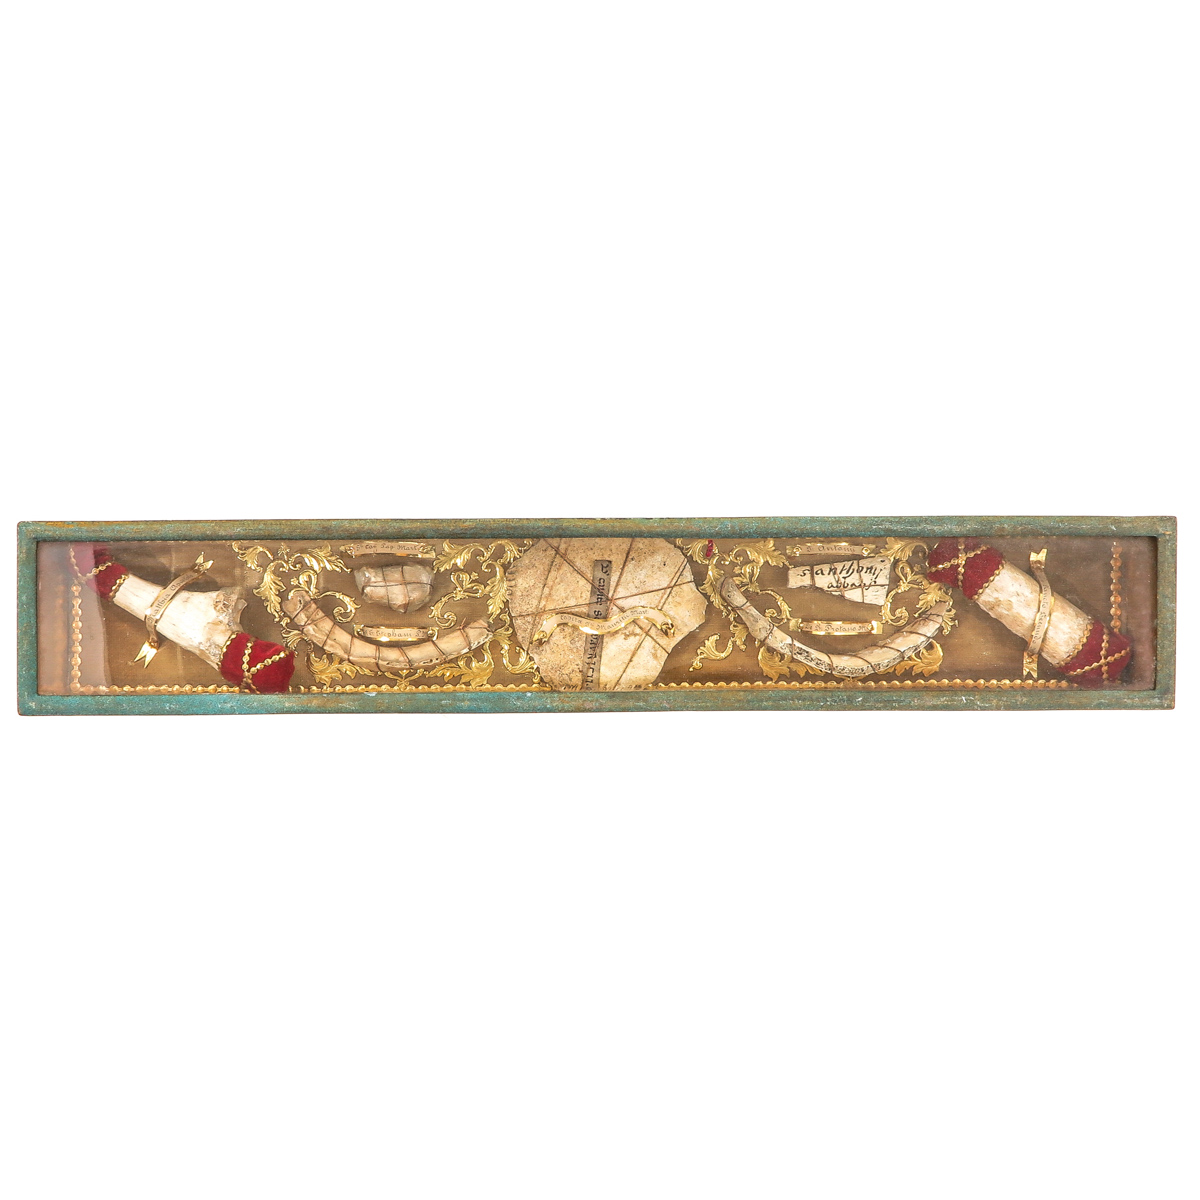 A Collection of 3 Reliquaries - Image 8 of 10